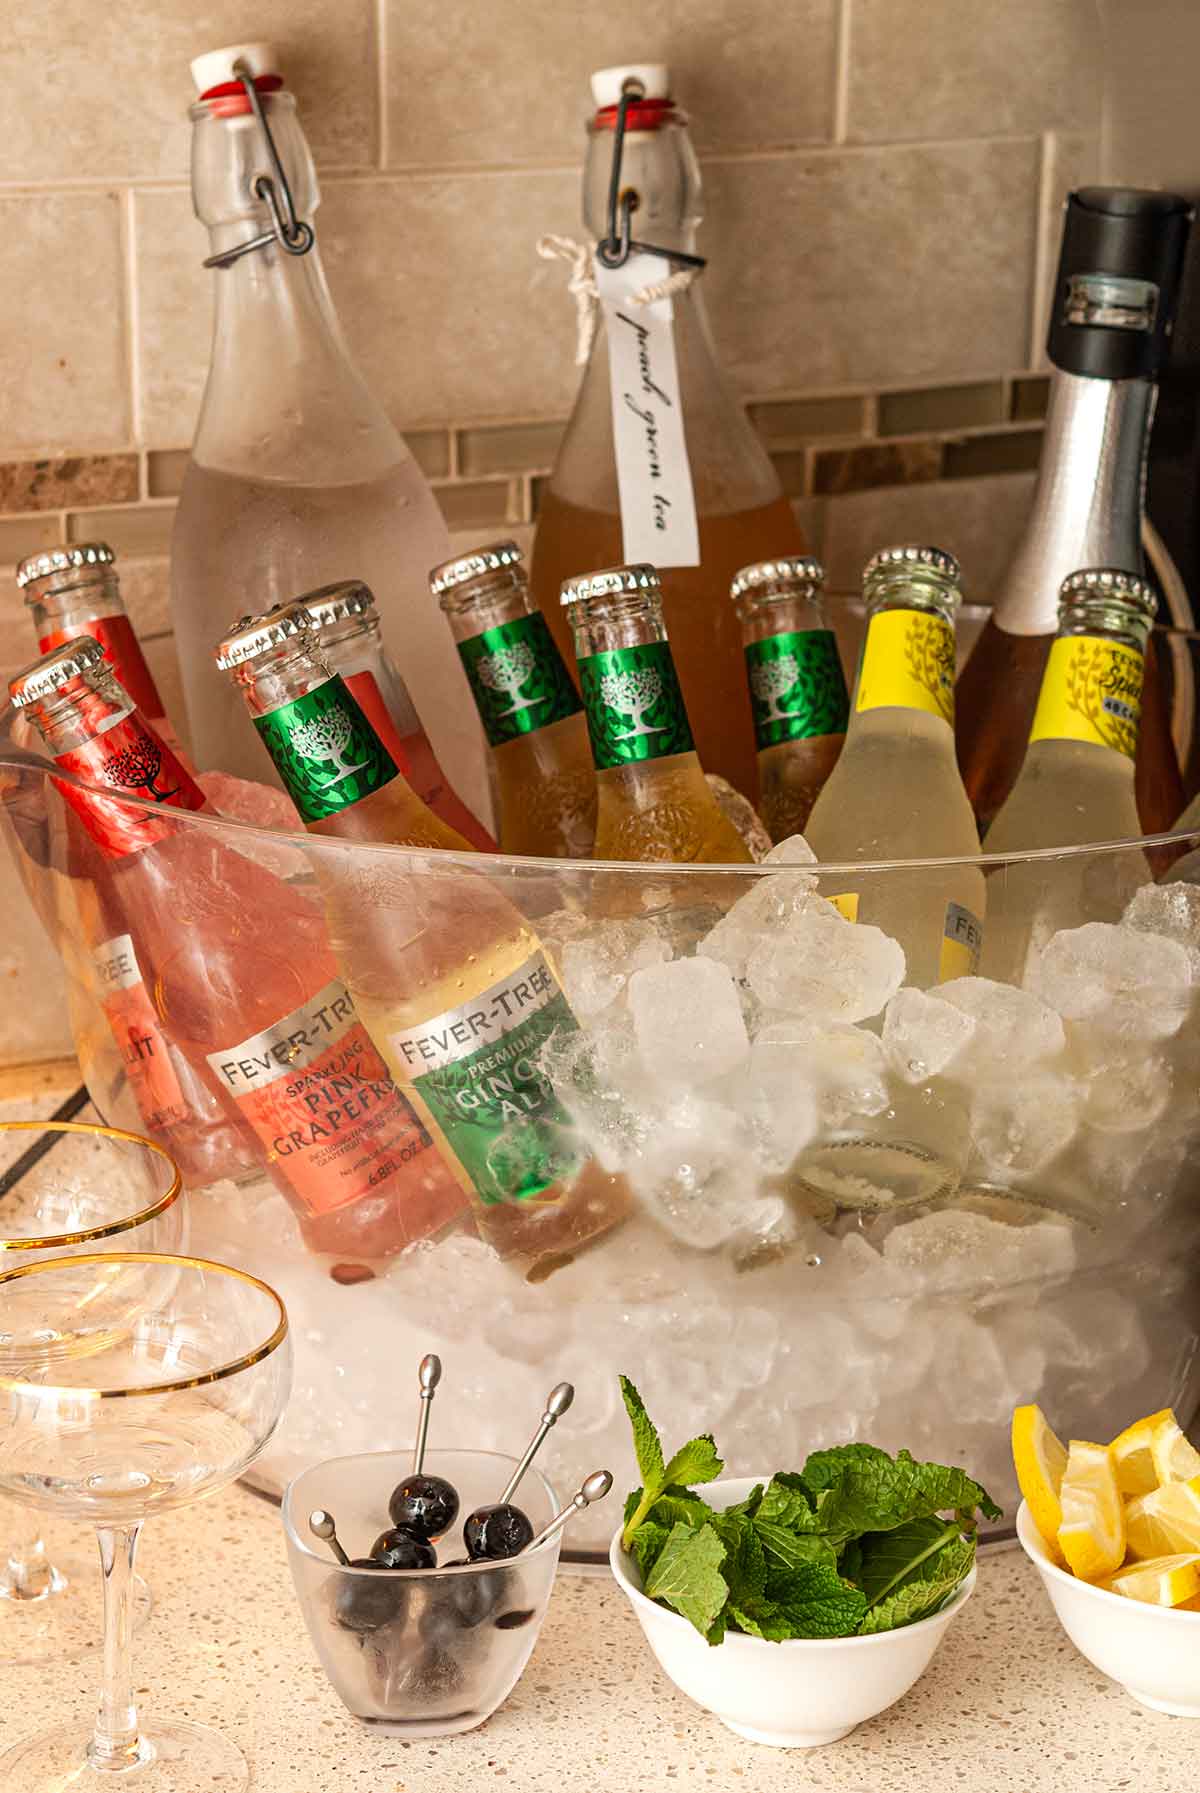 Bottles of soda, water, iced tea, and prosecco in ice.